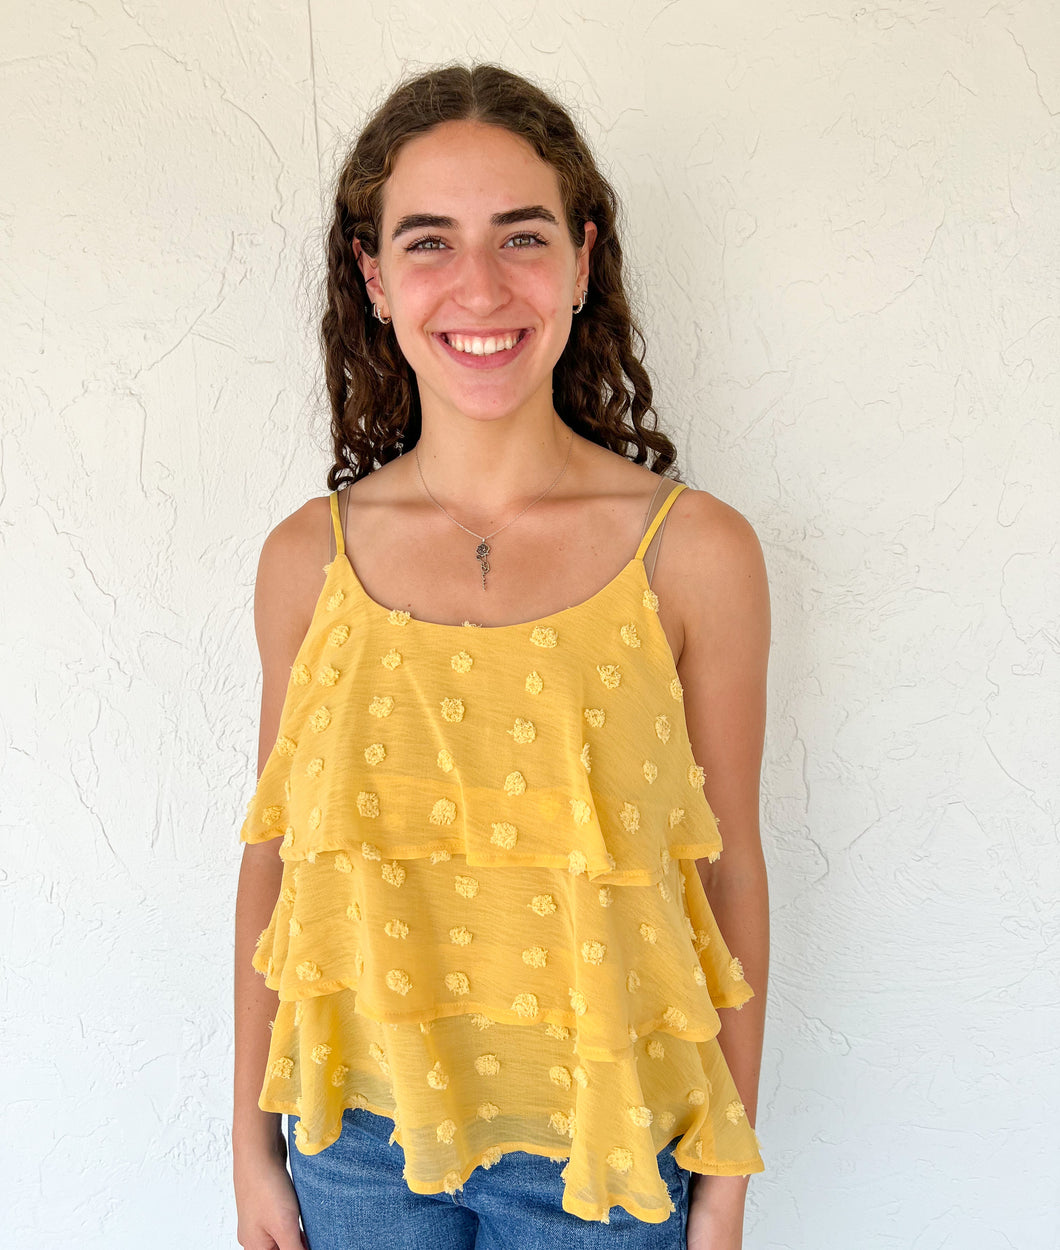 Mustard Yellow Dotted Tank Top